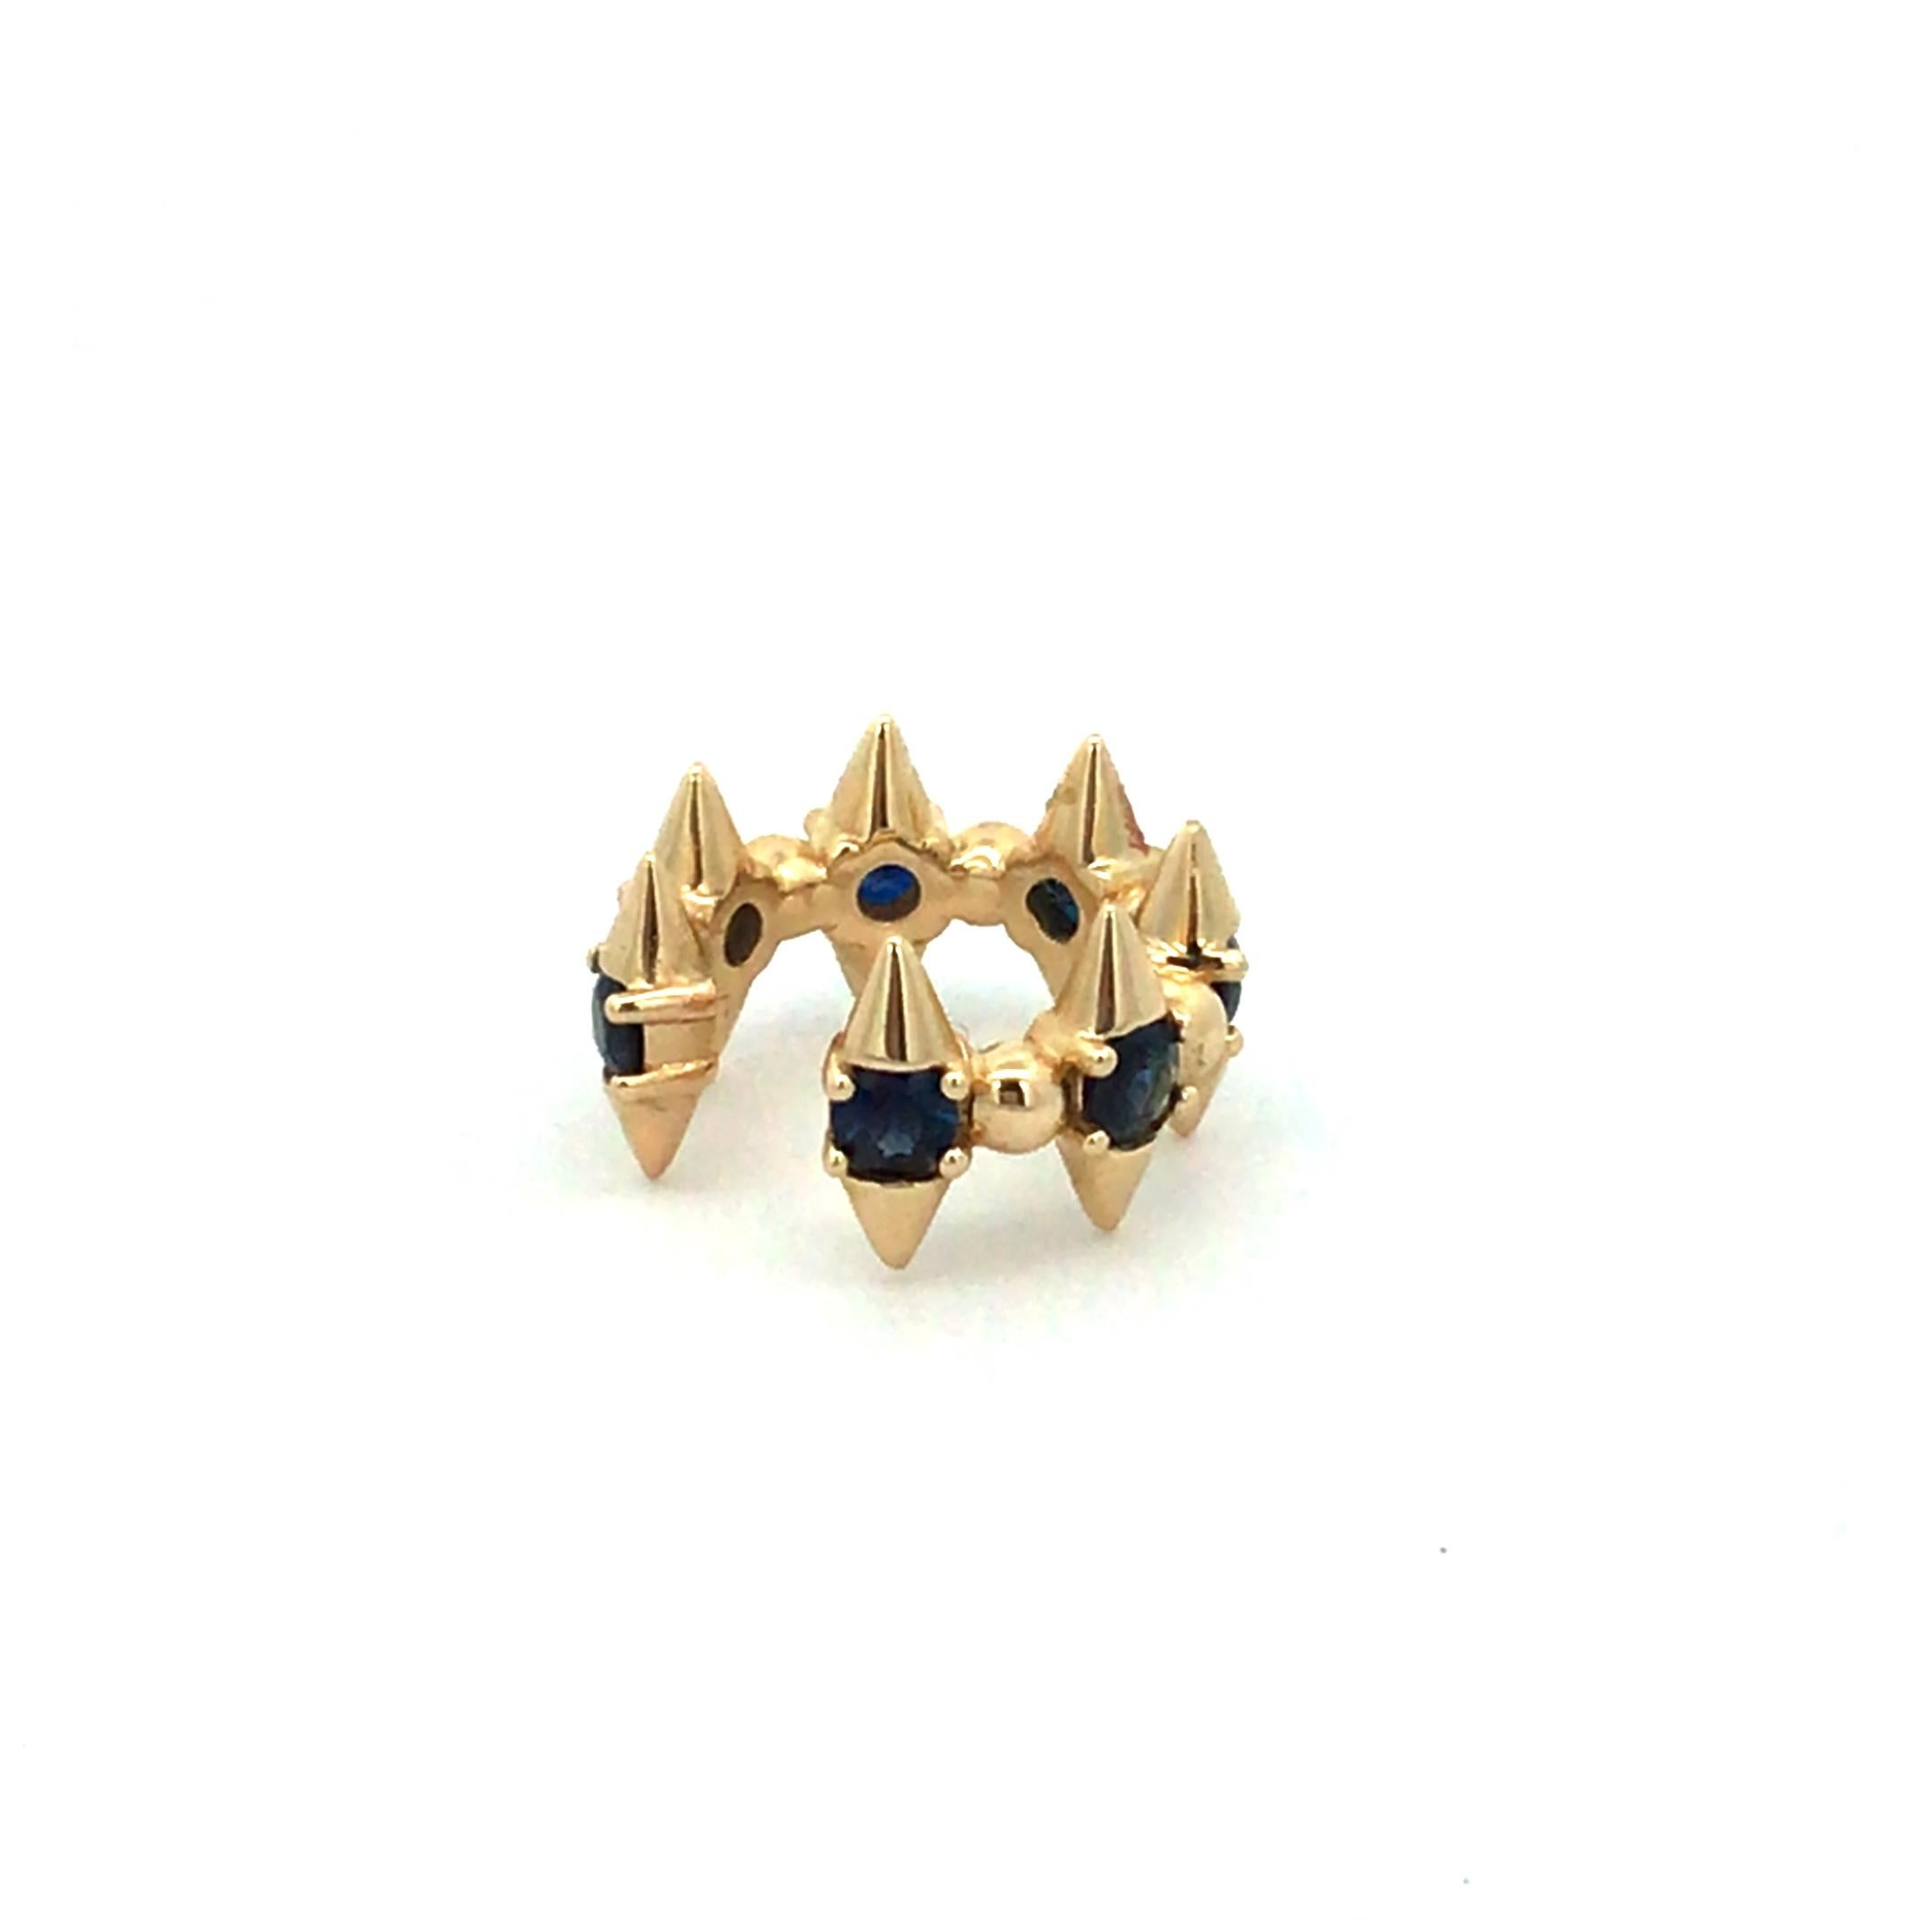 Adina Reyter One of a Kind Thick London Sapphire Spike Ear Cuff

14k yellow gold ear cuff with large blue sapphire spikes. 

Total Sapphire Weight: 0.64 ct.